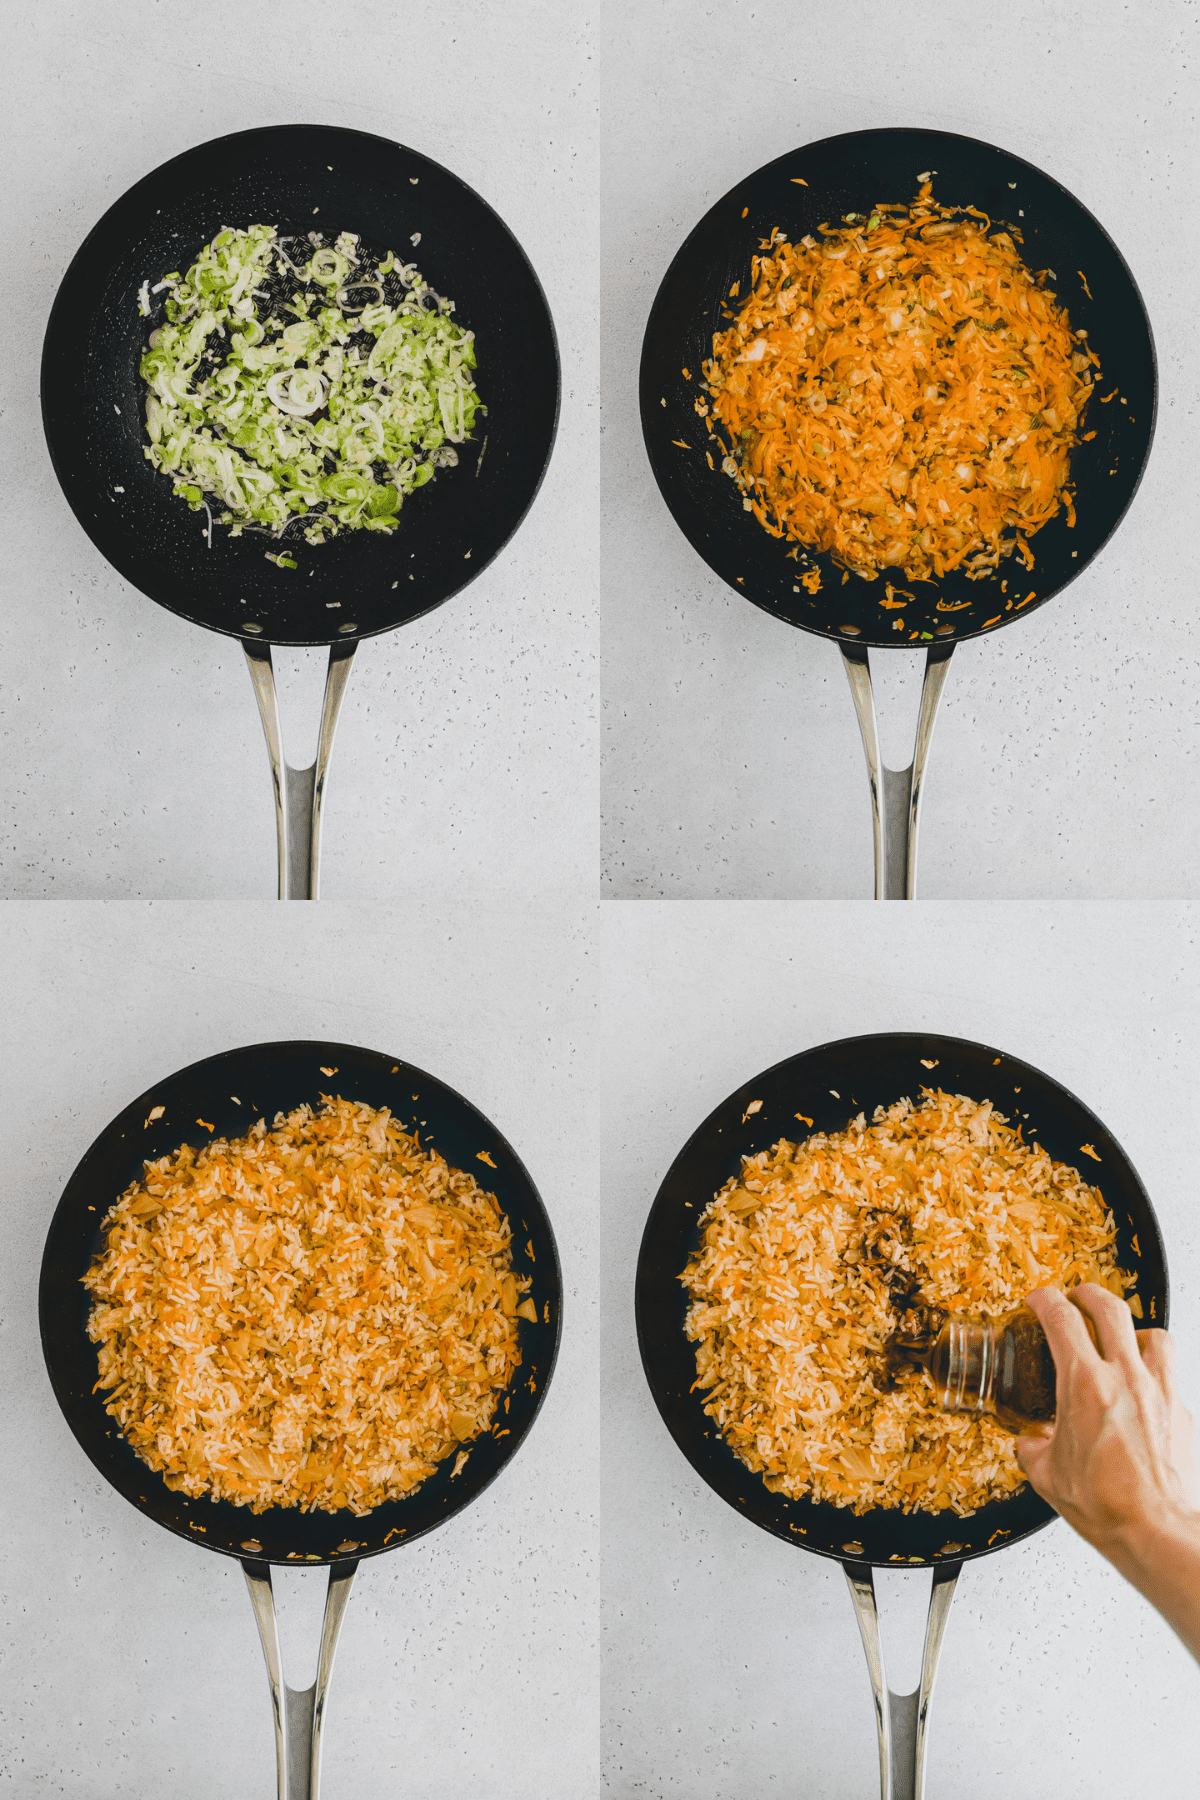 Top view of four process pictures of a top view of a skillet: top left is the skillet with garlic, ginger and green onion being sautéed; top right is the skillet with added carrots and kimchi, bottom left is with added rice, bottom right is with added sauce. 